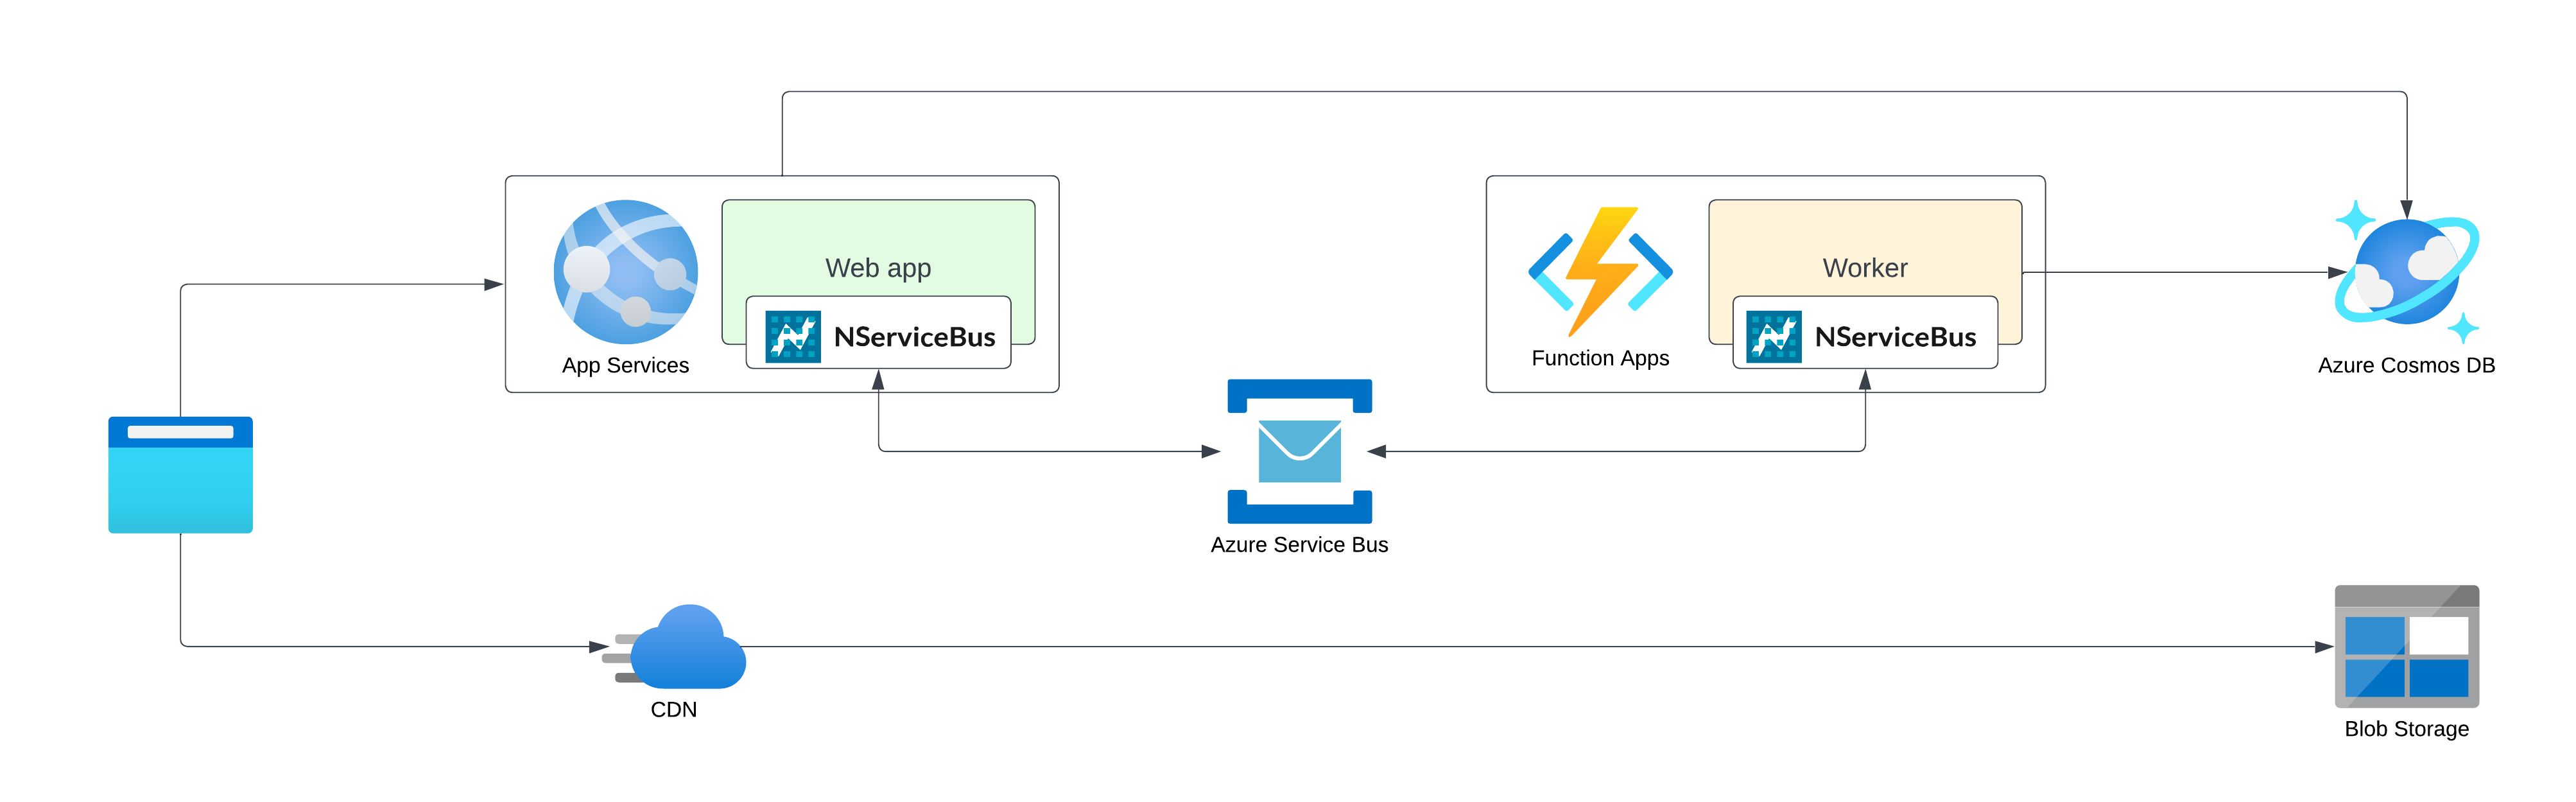 Overview of Azure web-queue-worker style